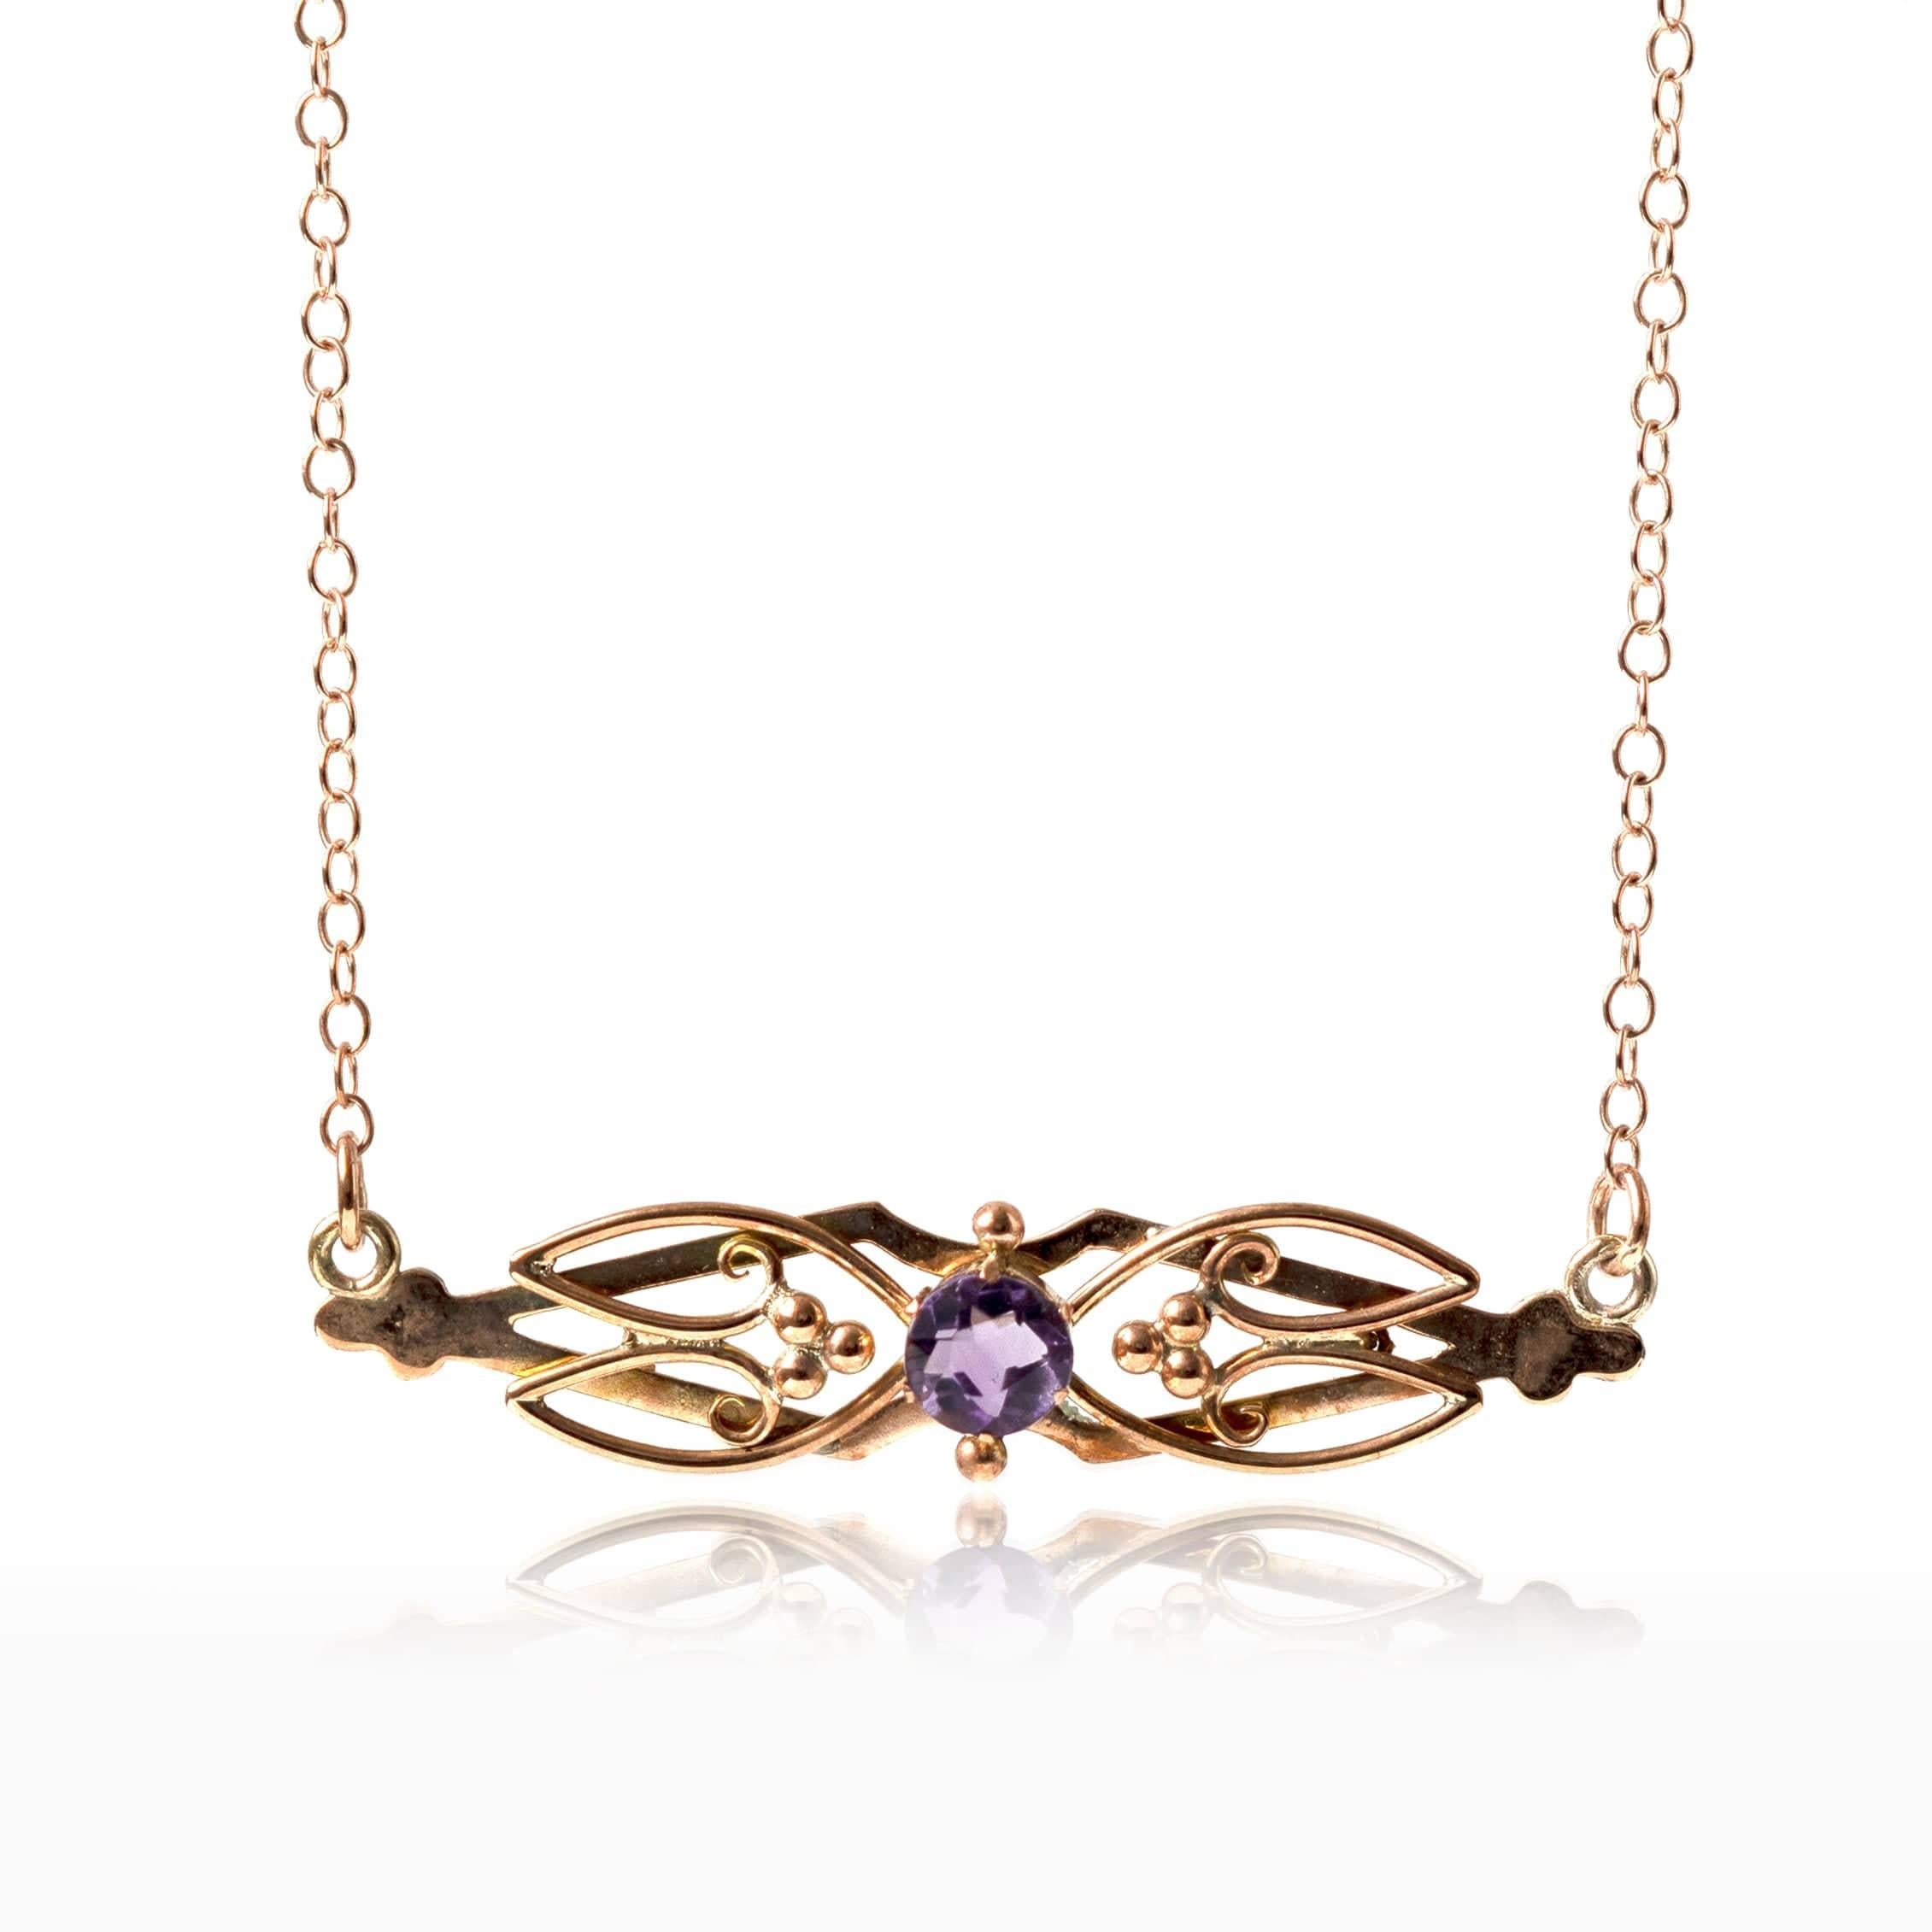 Legend has it Amethyst will keep the wearer clear-headed and quick witted in battle and in business affairs.

Our early 20th century pendant features a single solitaire diamond set in 15ct rose gold. The piece was converted from a brooch into a